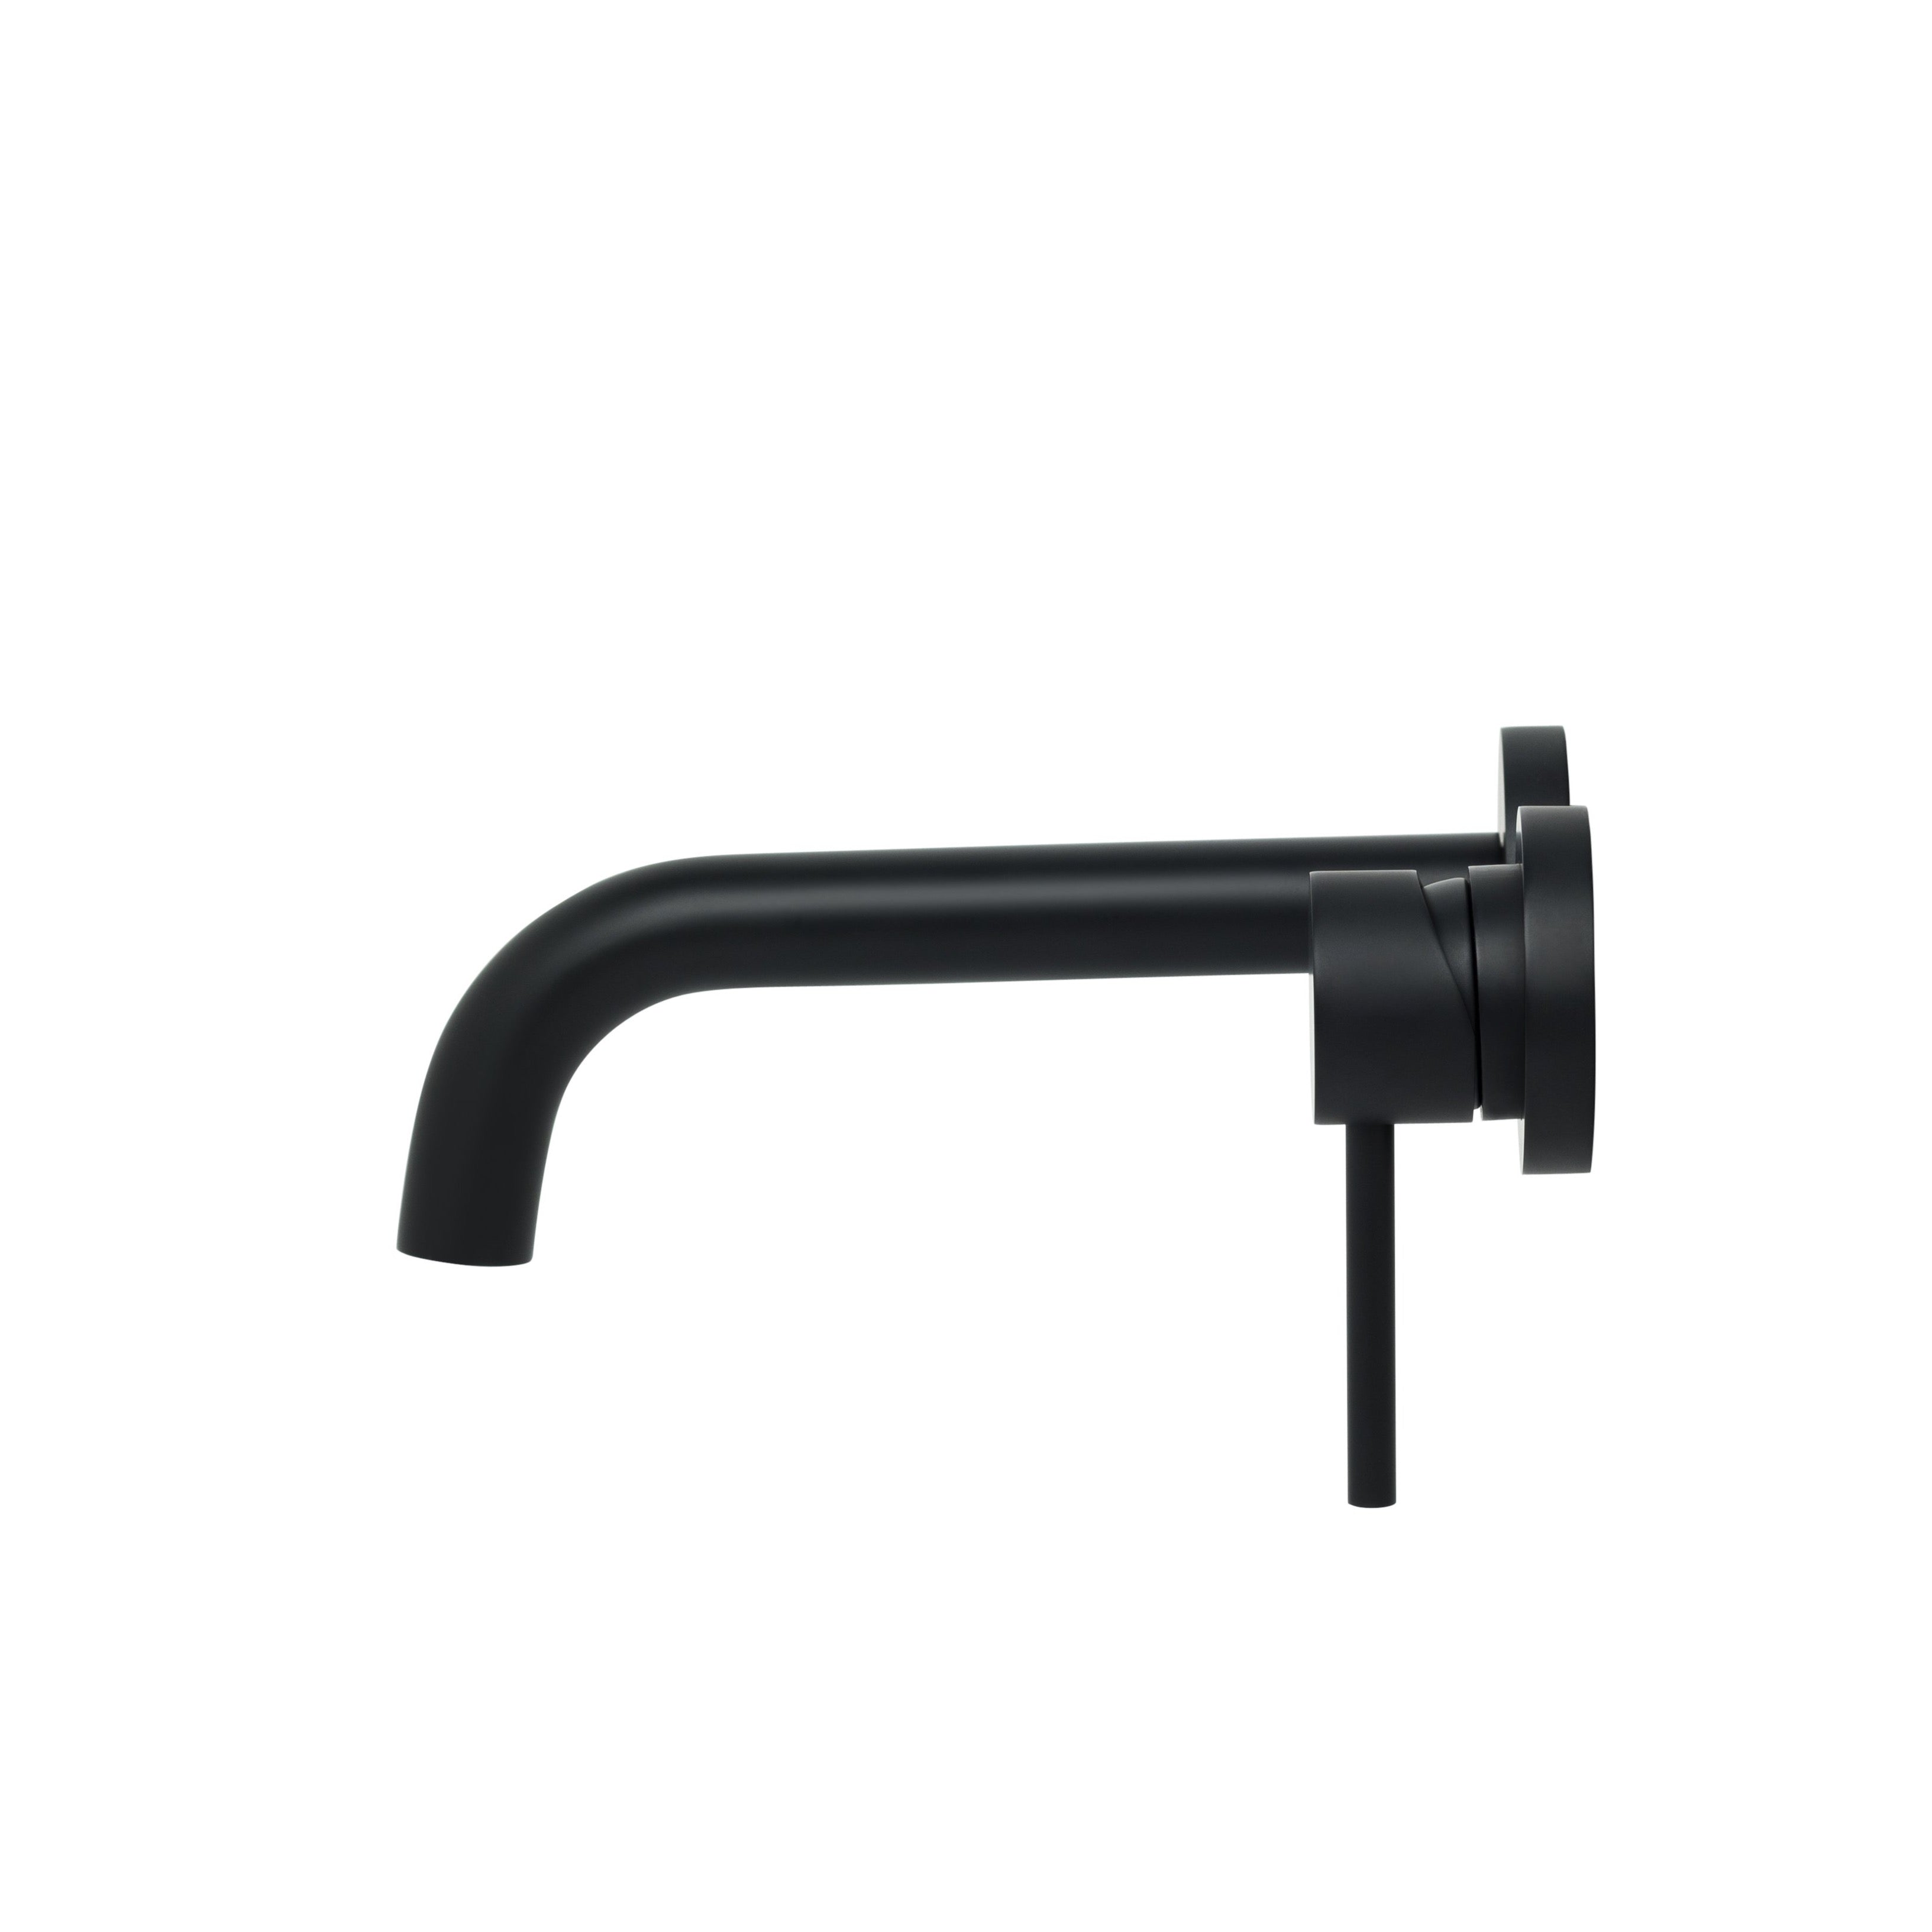 Bondi Pin Lever Wall Mixer Set with Curved Spout in Matte Black